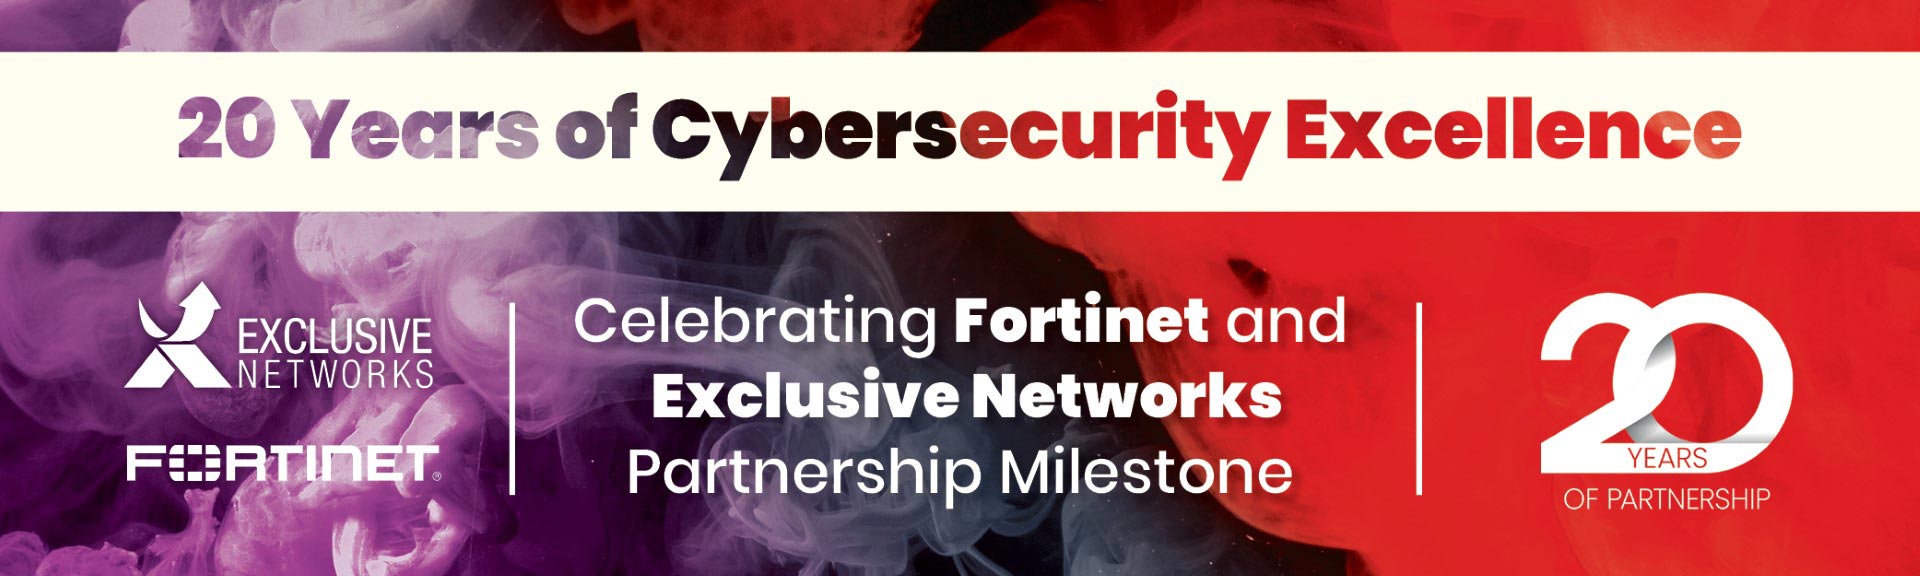 20 Years of Cybersecurity Excellence